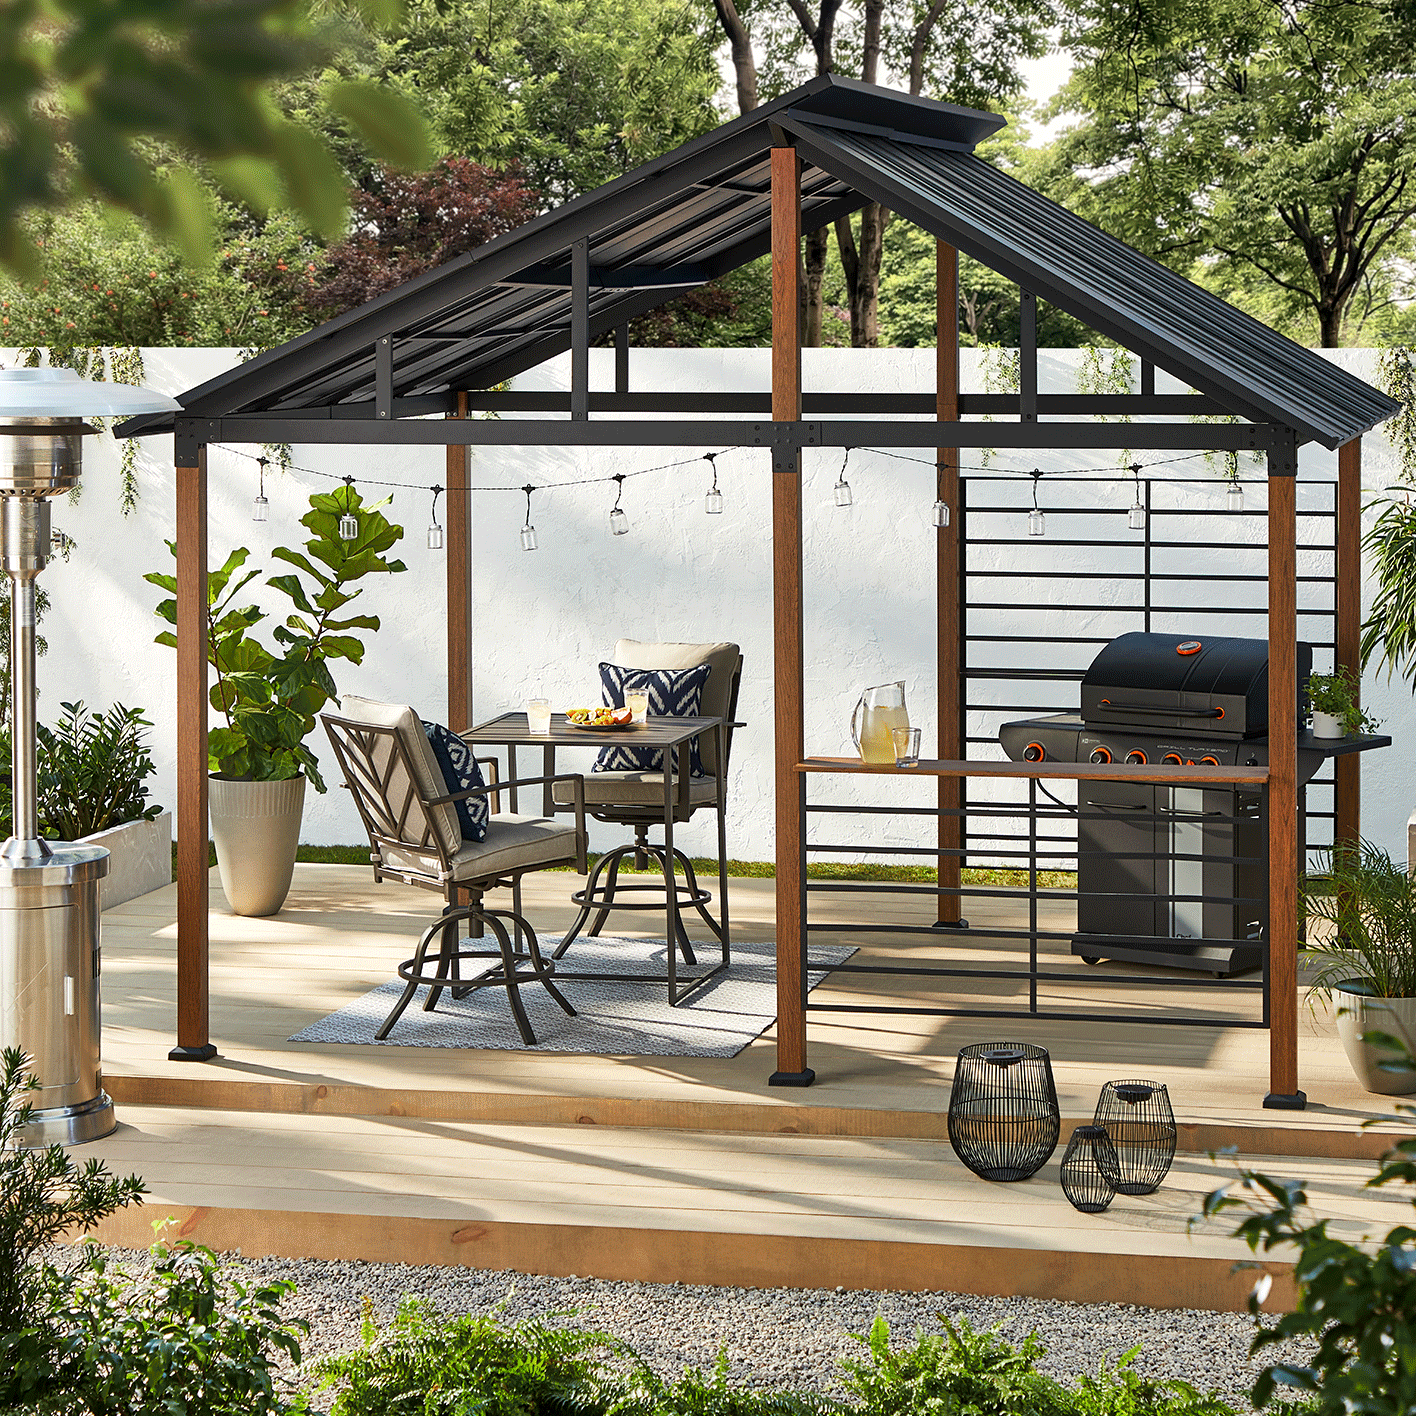 CANVAS Plateau Gazebo set up on wooden backyard porch with dining set and BBQ.   